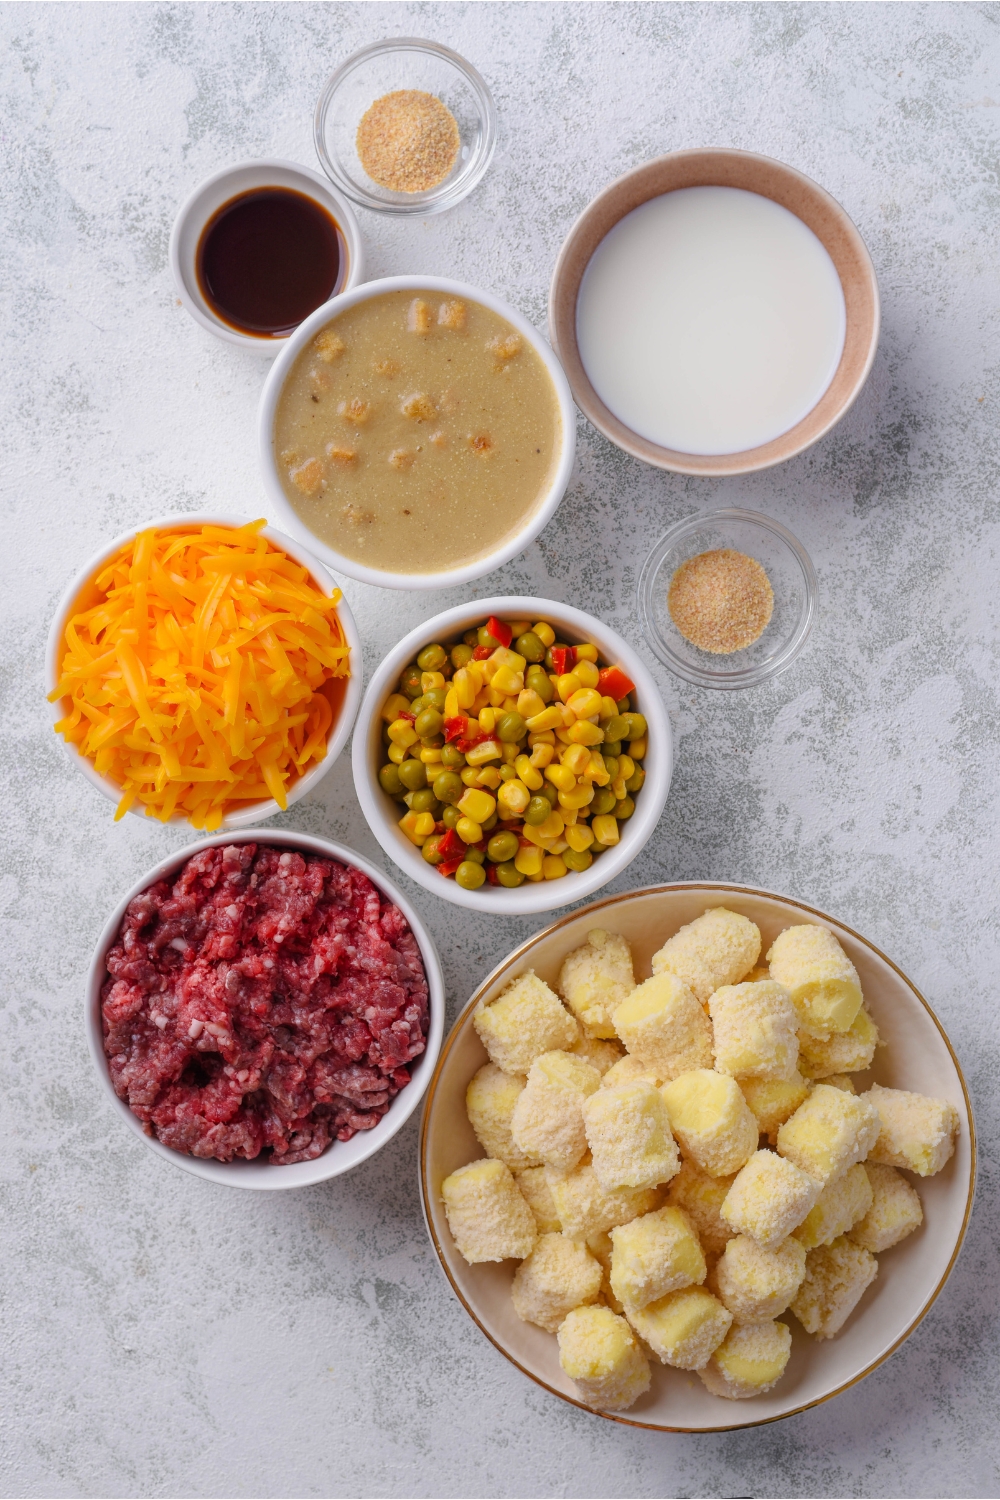 An assortment of ingredients including bowls of frozen tater tots, raw ground beef, shredded cheese, milk, creamy soup, mixed vegetables, and spices.